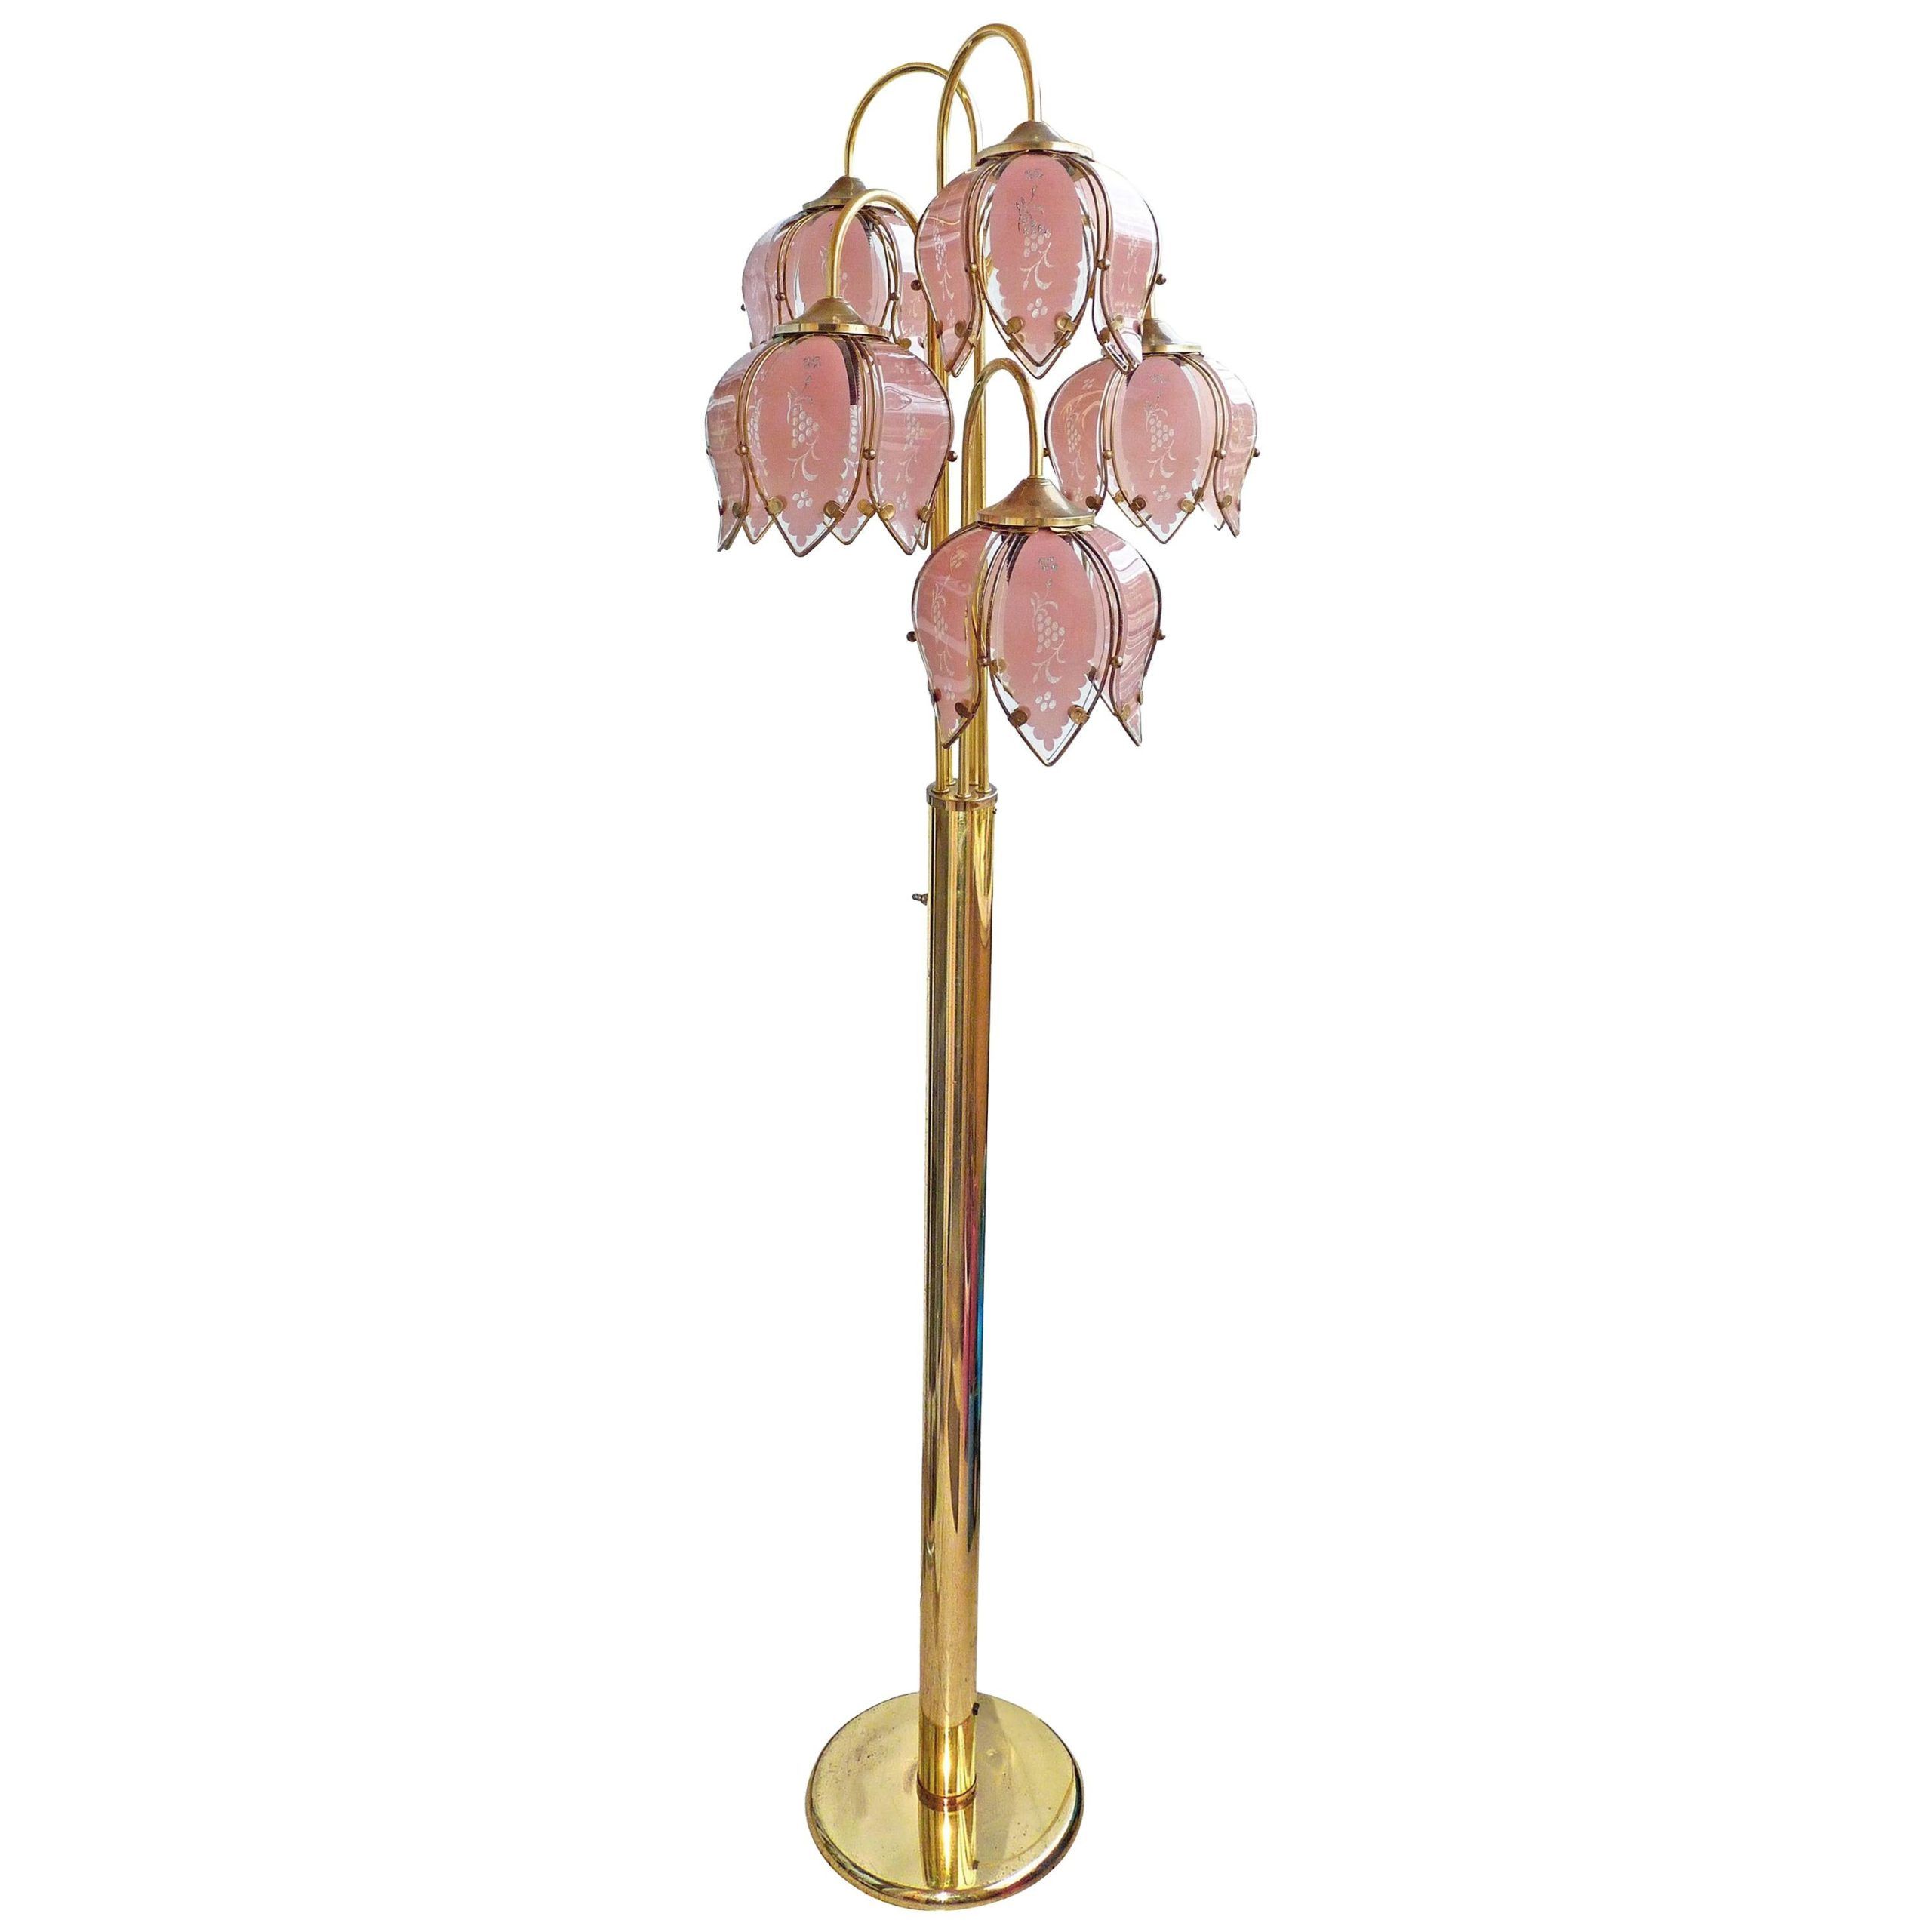 Modernist Hollywood Regency Tree Floor Lamp W Murano Pink Glass Flower  Bouquet For Sale At 1stdibs | Flower Floor Lamp, Vintage Flower Lamp,  Hollywood Regency Art Deco Tulip Lamp Pertaining To Flower Floor Lamps (Photo 1 of 15)